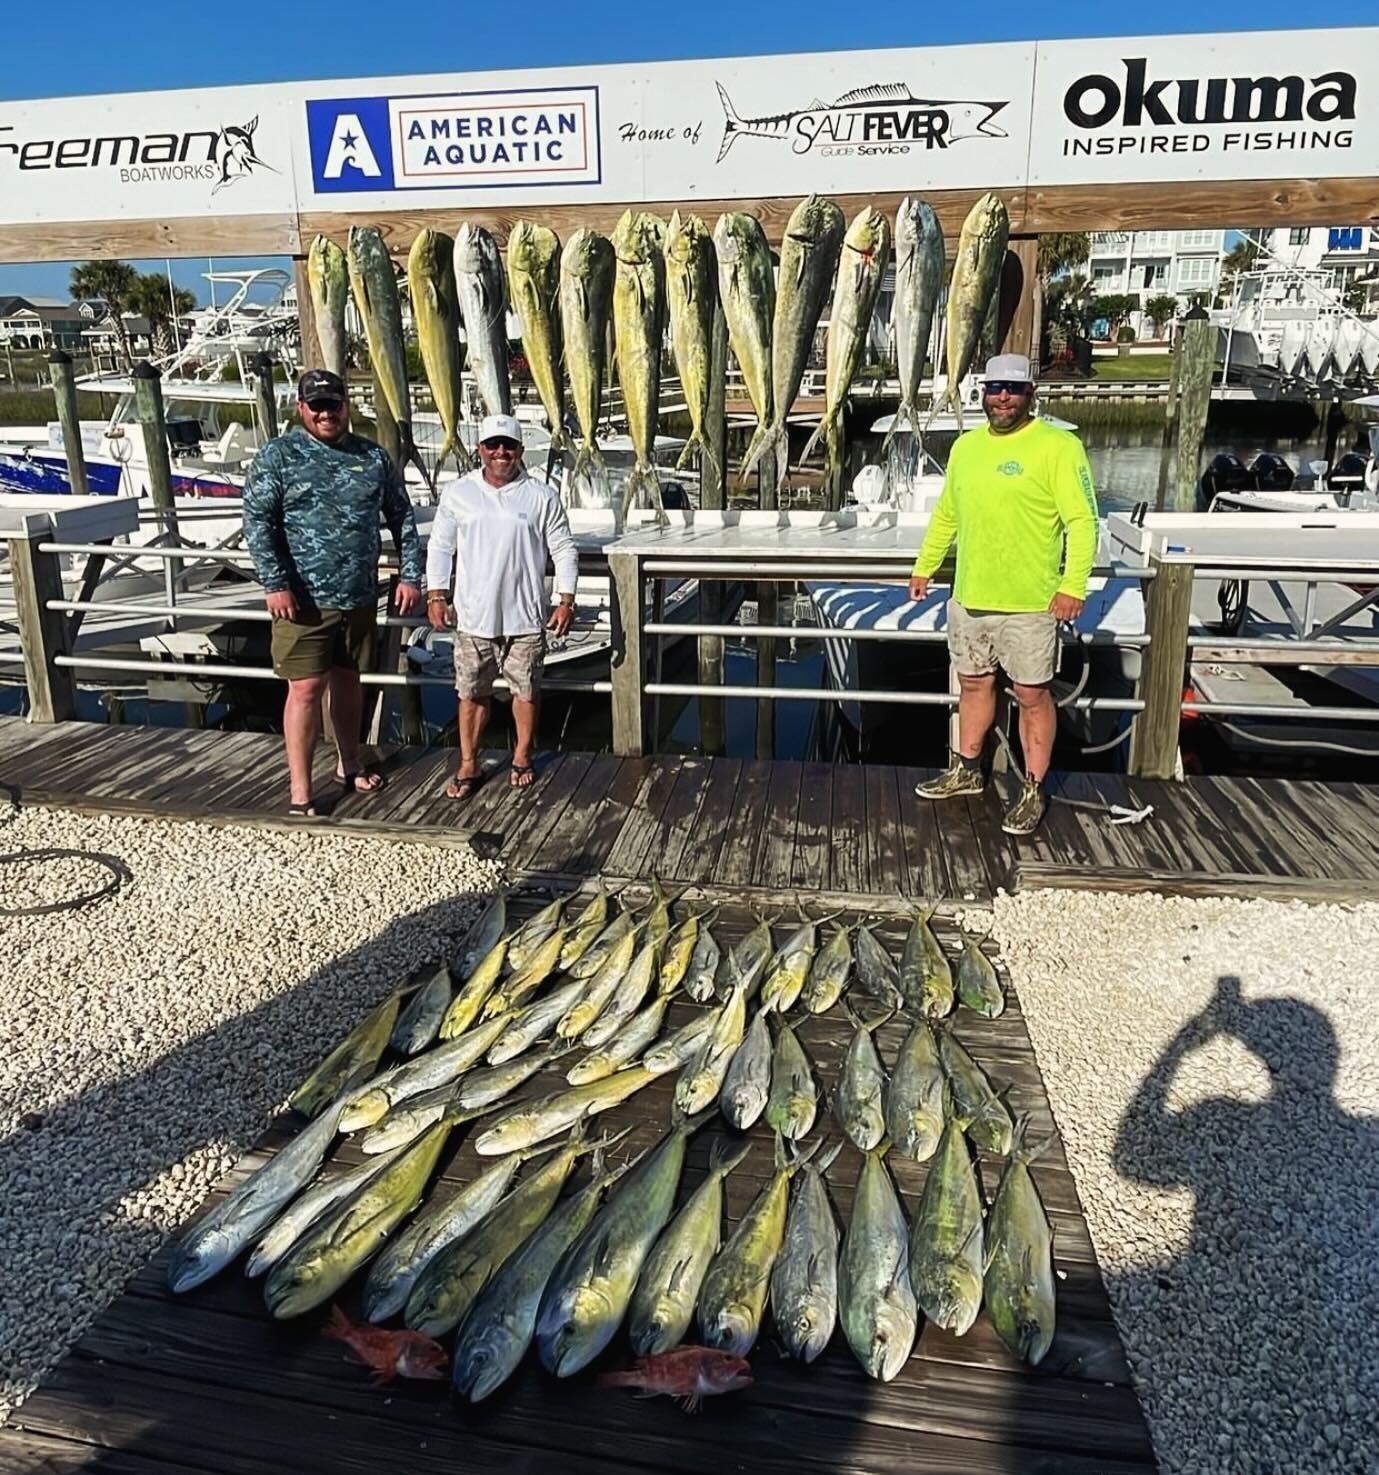 The boys crushed them today!! I hope this is a sign of a good season to come! 
🔥
💥
🔥
@SaltFeverGuideService&mdash;&gt; 910.250.3021
.
.
LIKE OUR PAGE TO FOLLOW THE SQUAD
🇺🇸🐟🇺🇸🐟🇺🇸🐟🇺🇸🐟🇺🇸🐟🇺🇸🐟🇺🇸🐟
.
@AmericanAquatic
.
.
| #SaltFeve